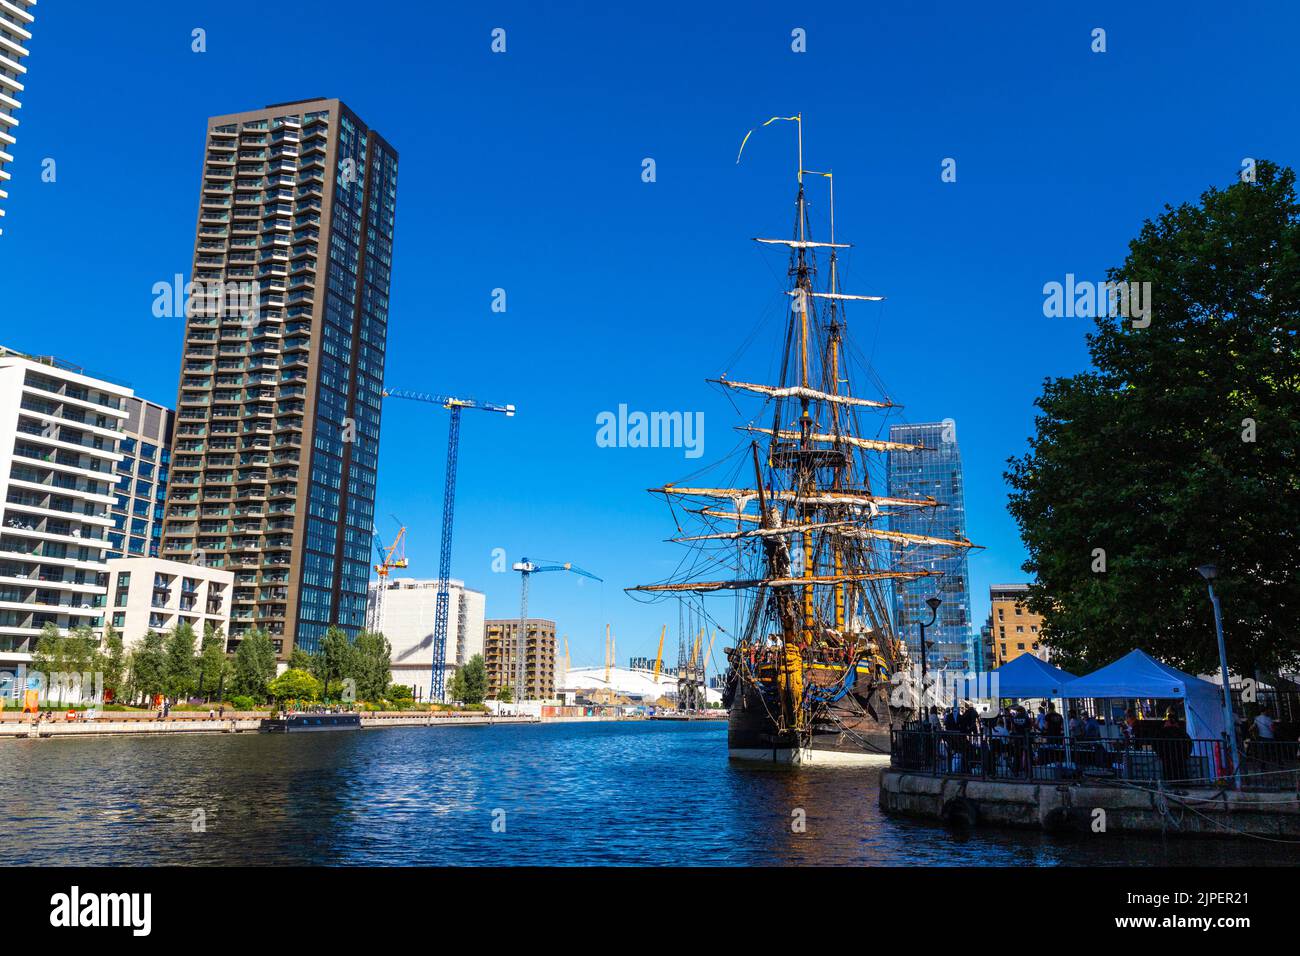 10 August 2022, London, UK - Götheborg of Sweden, largest wooden ocean-sailing ship docked in Canary Wharf South Dock on it's journey to Asia Stock Photo